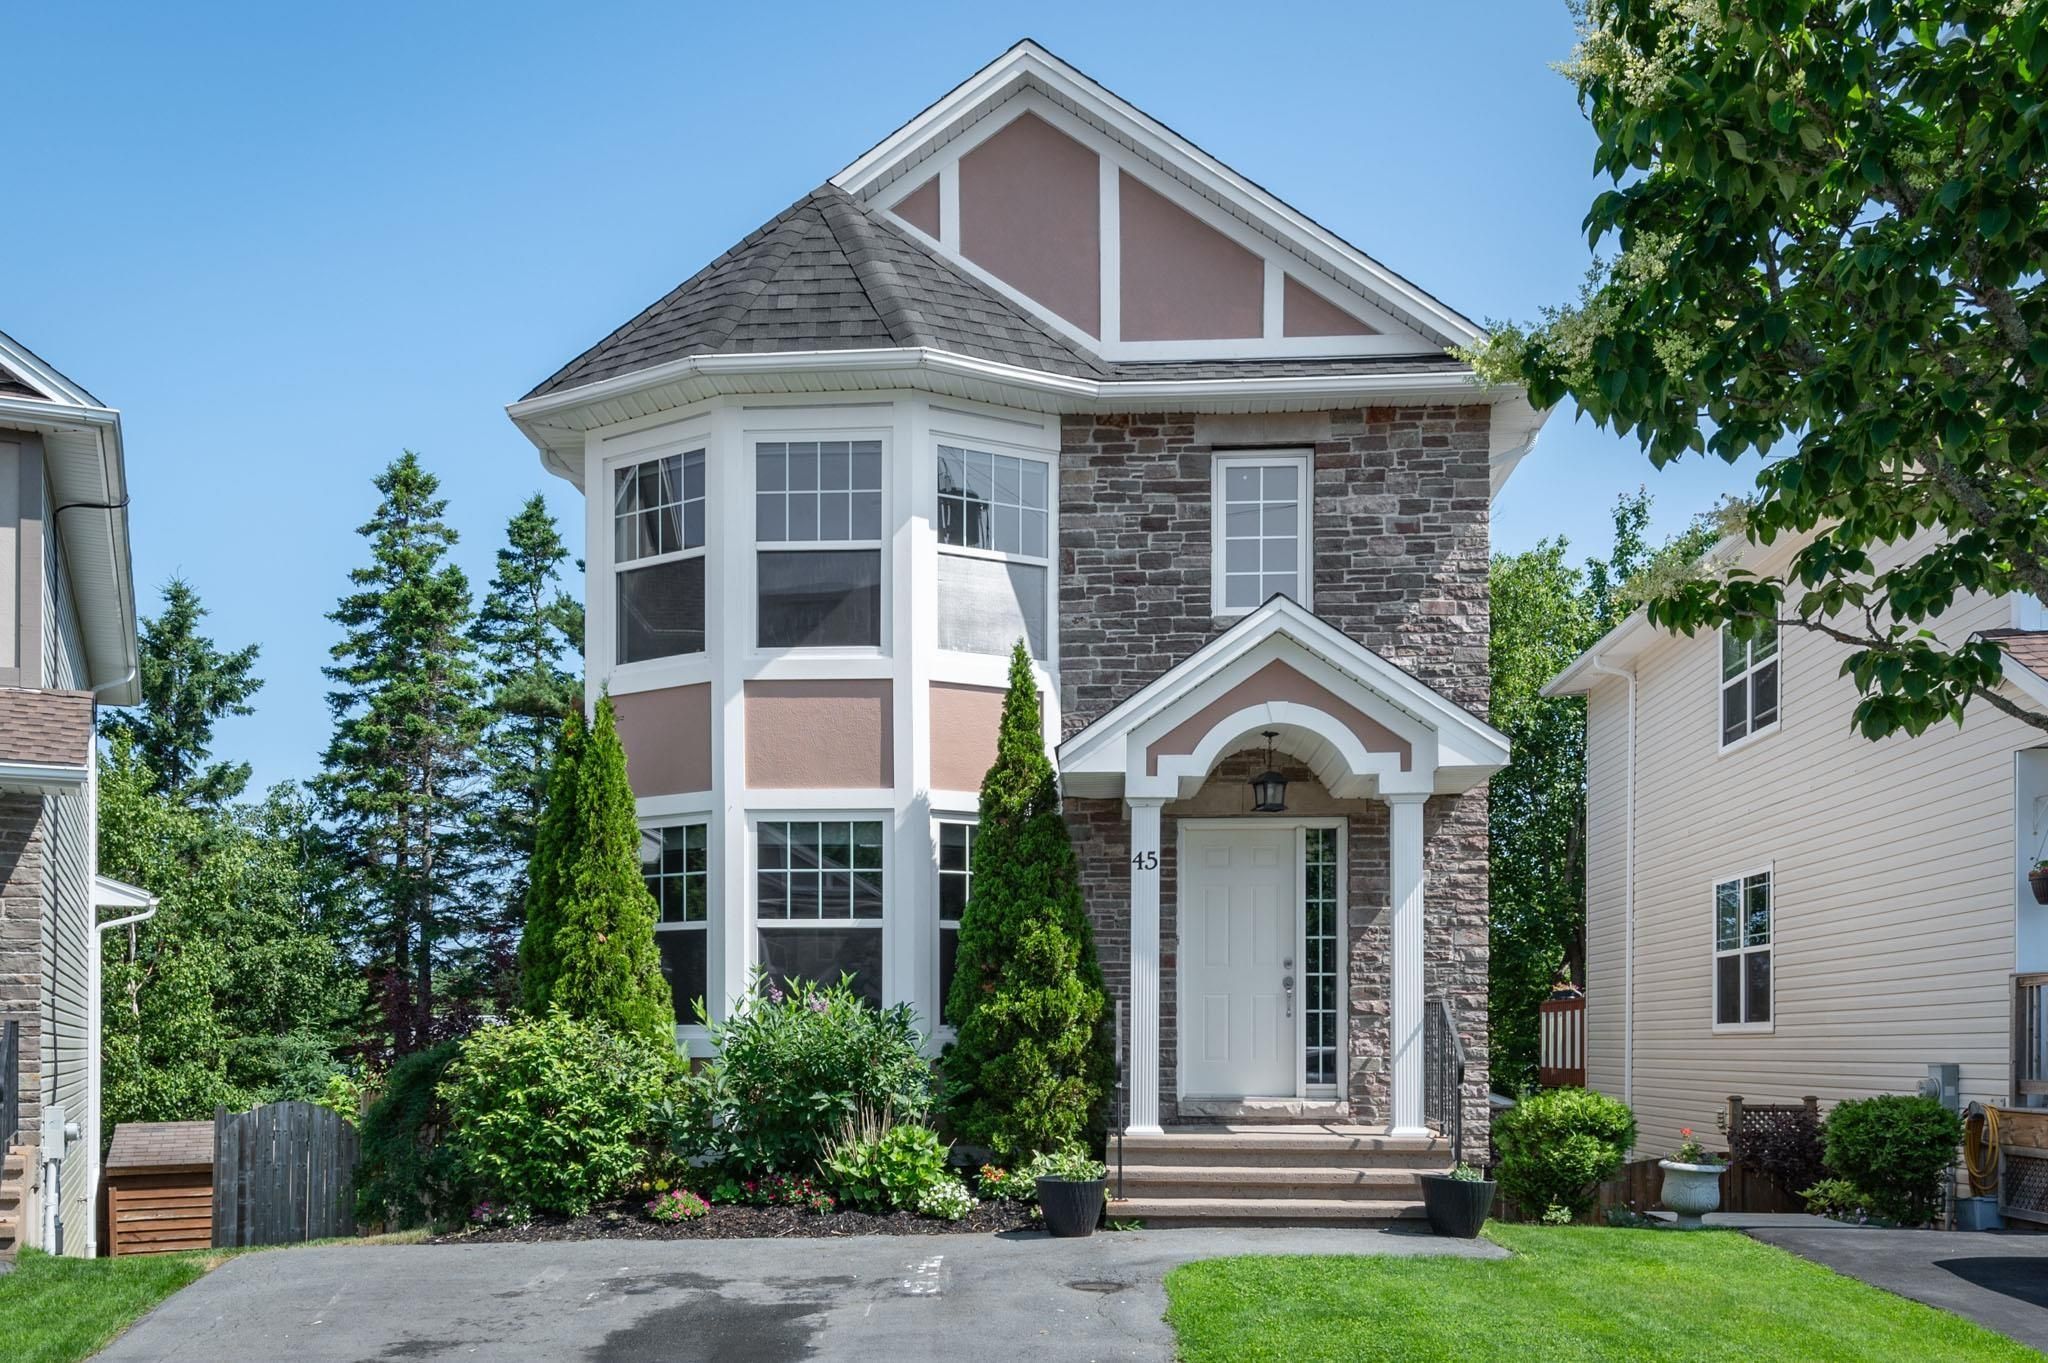 New property listed in 7-Spryfield, Halifax-Dartmouth